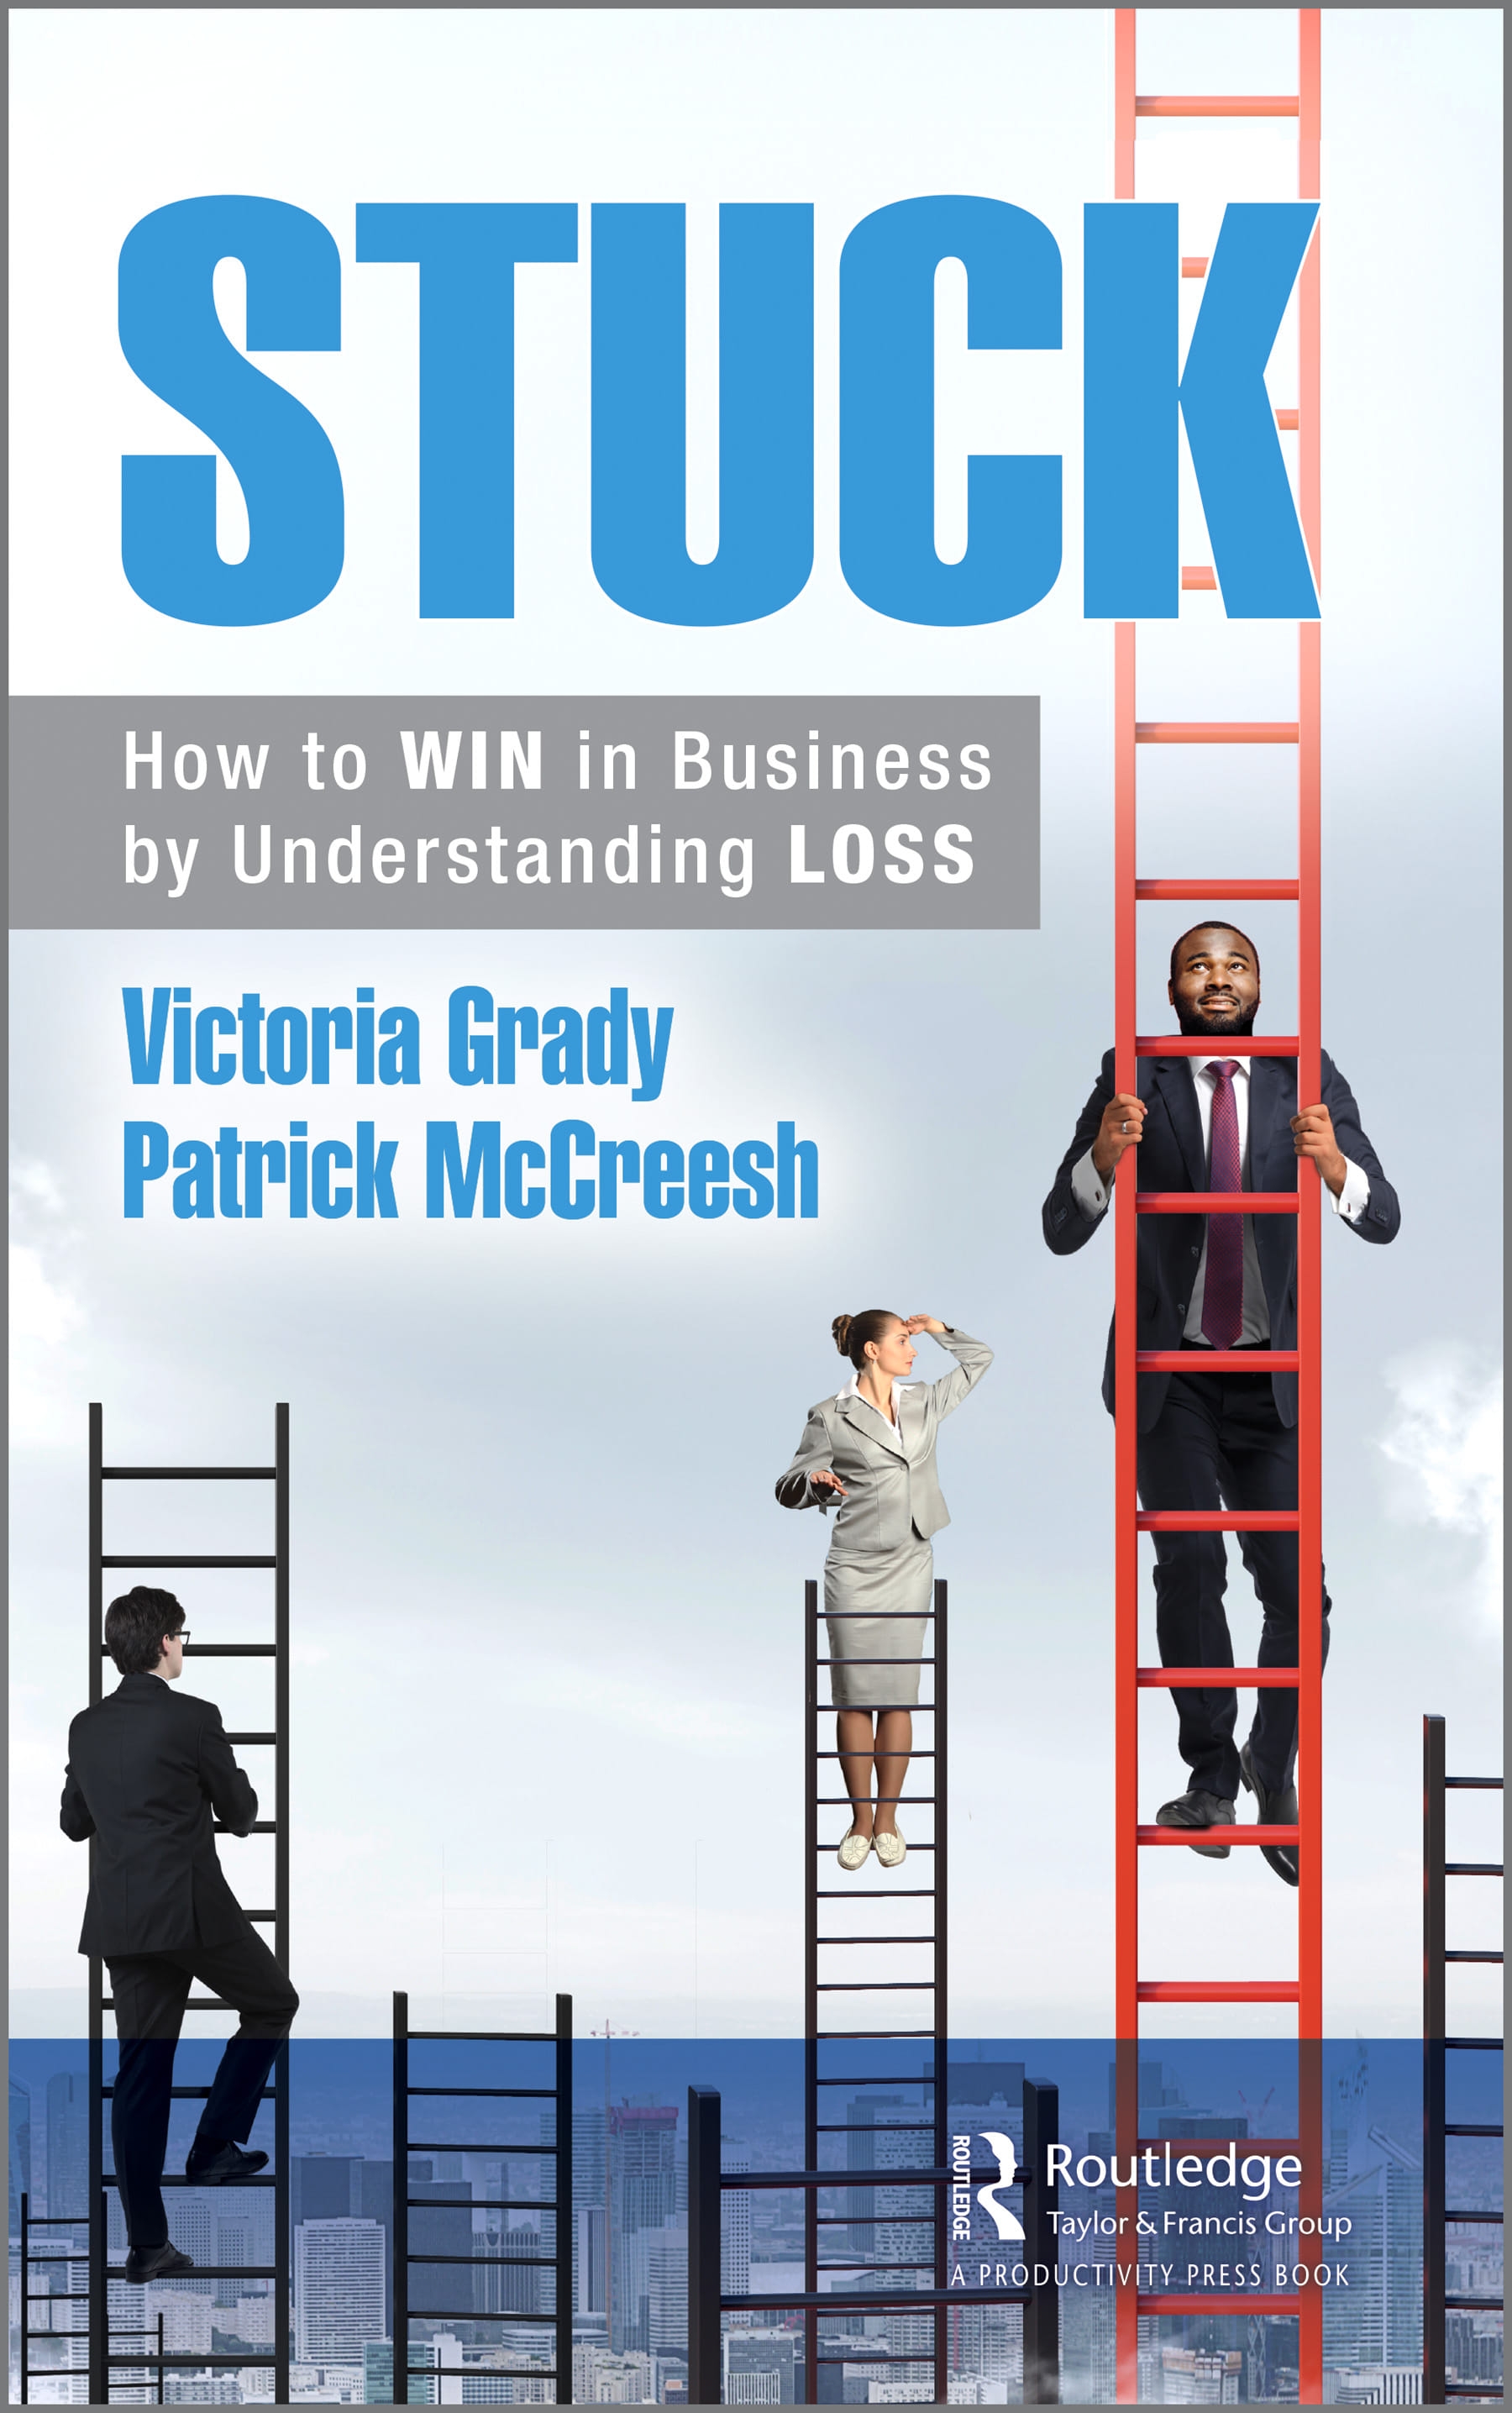 Stuck: How to Win in Business by Understanding Loss